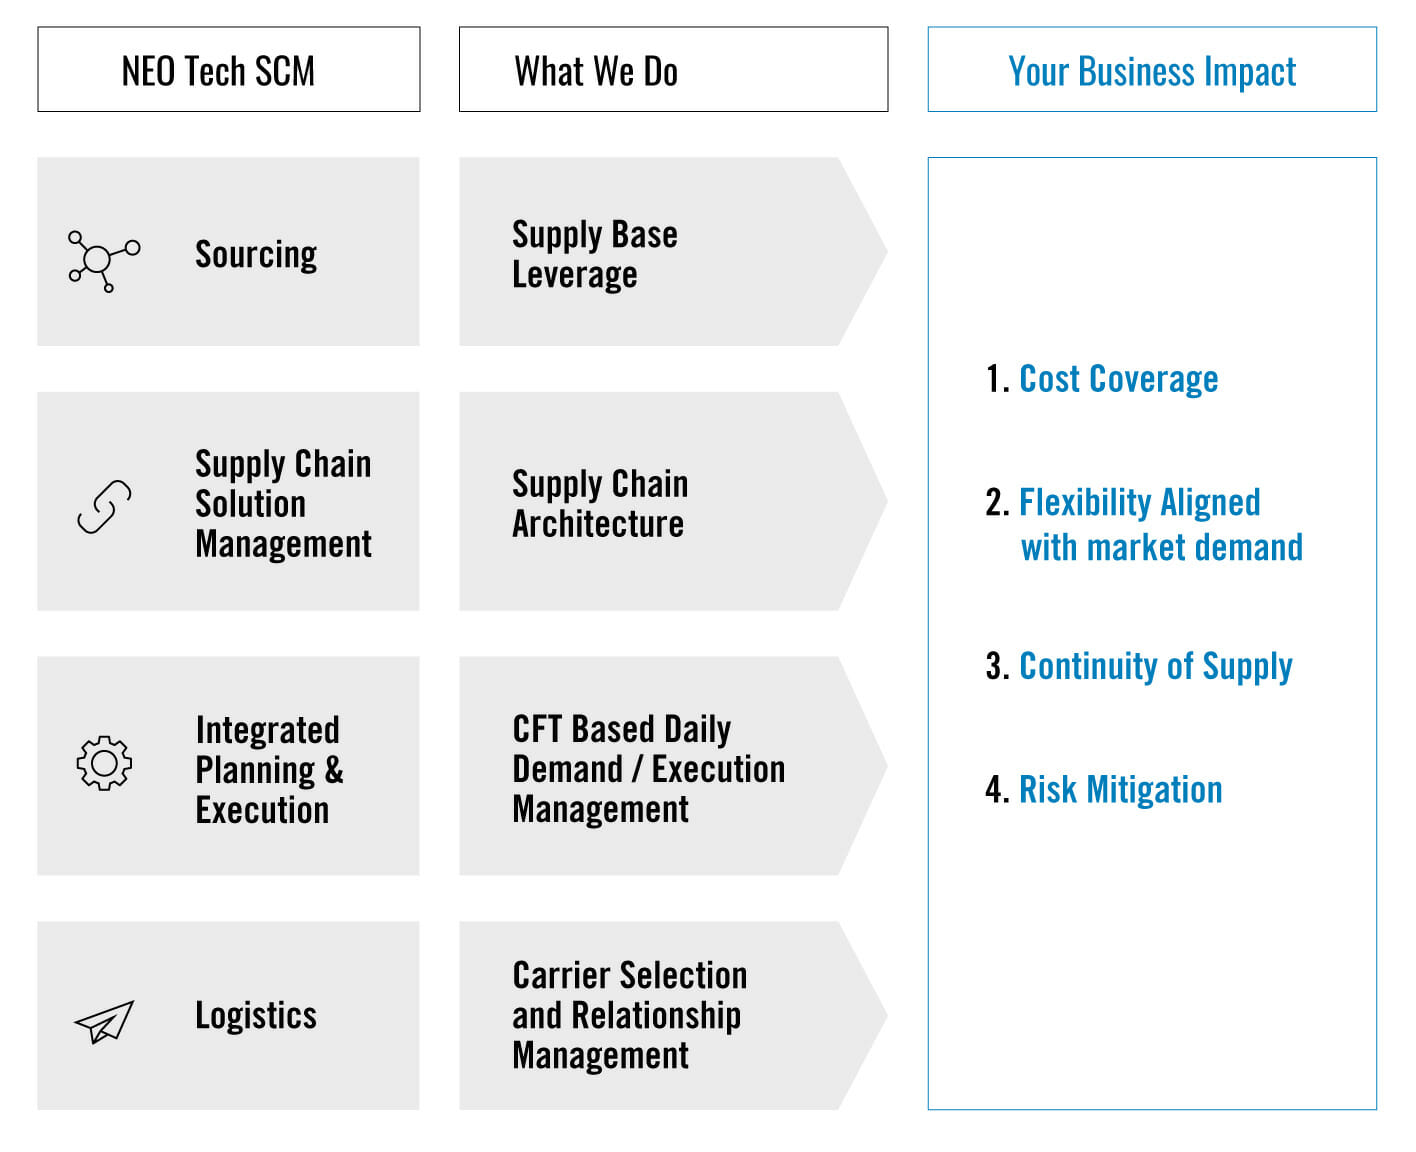 Supply Chain Management & Logistics for EMS - NEOTech